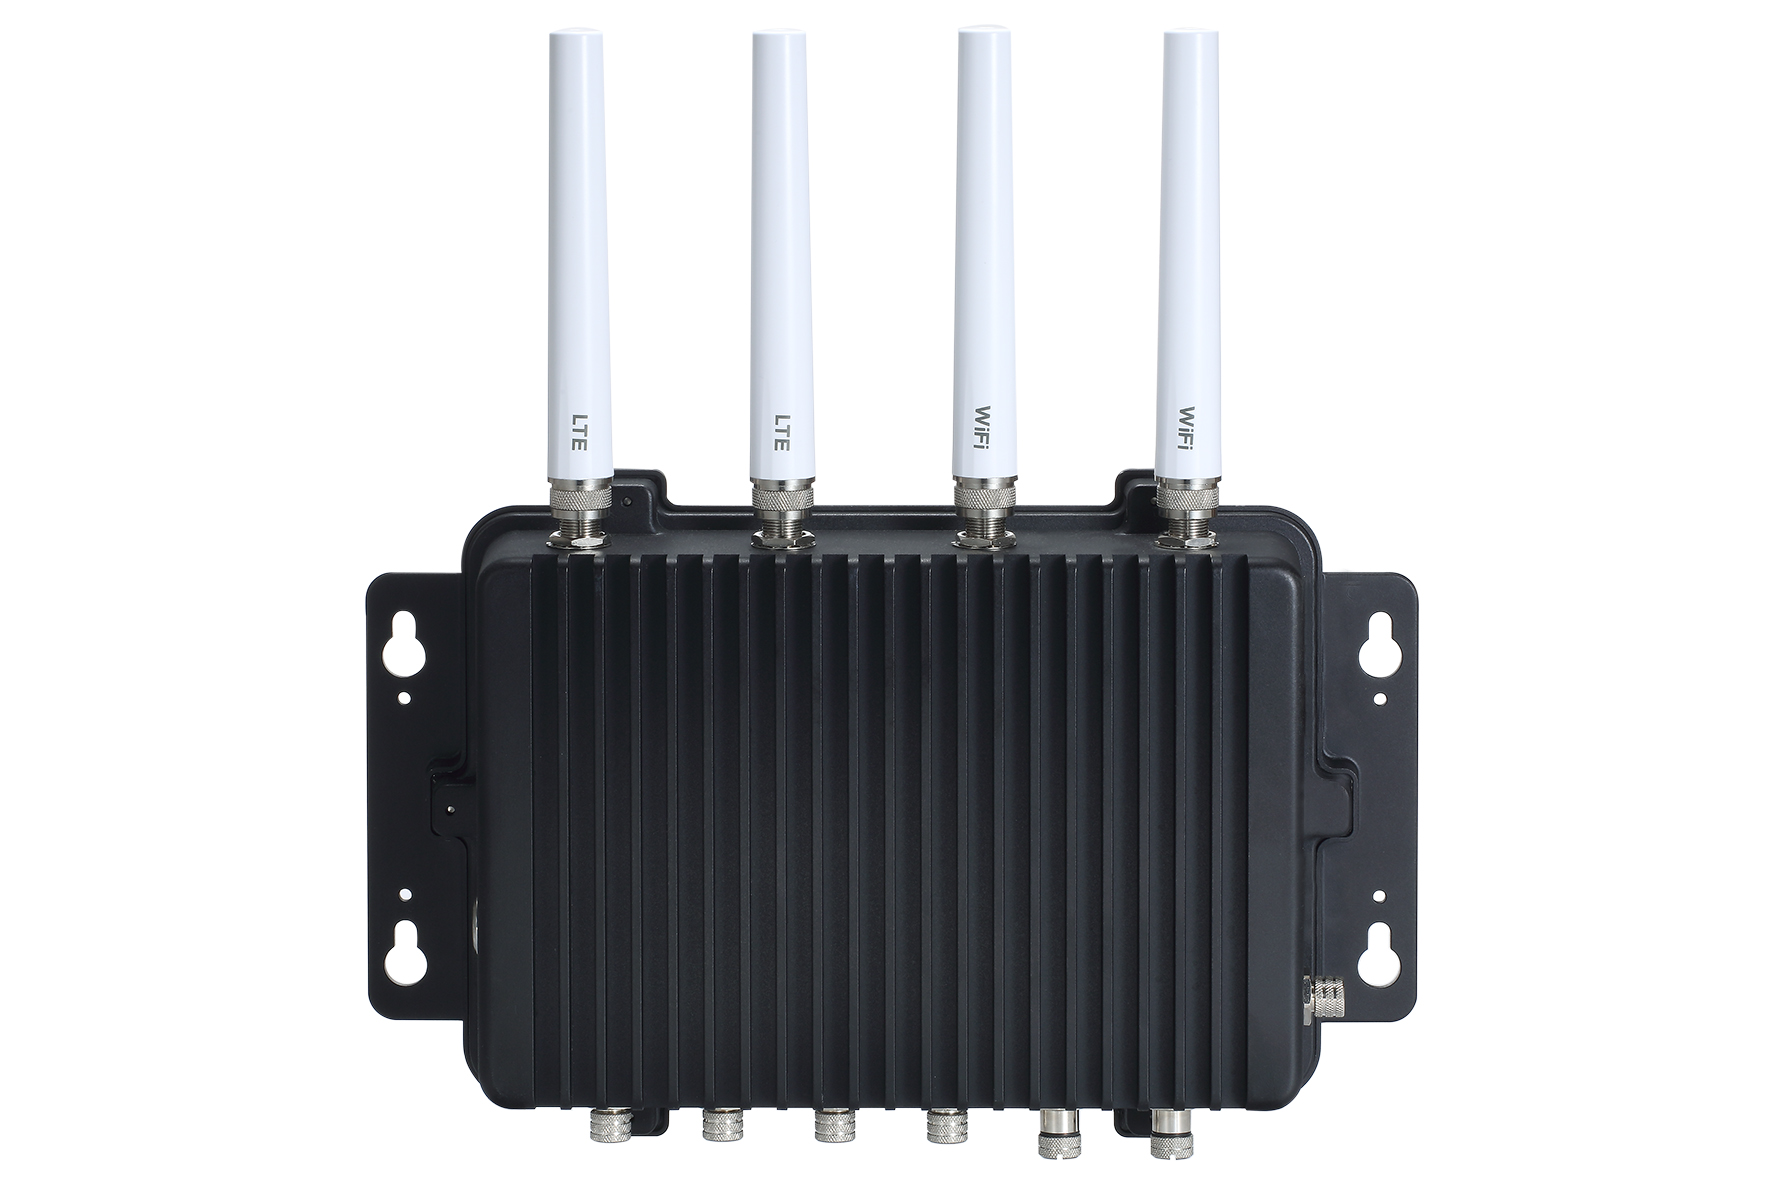 Rugged IP67-rated Fanless Embedded System